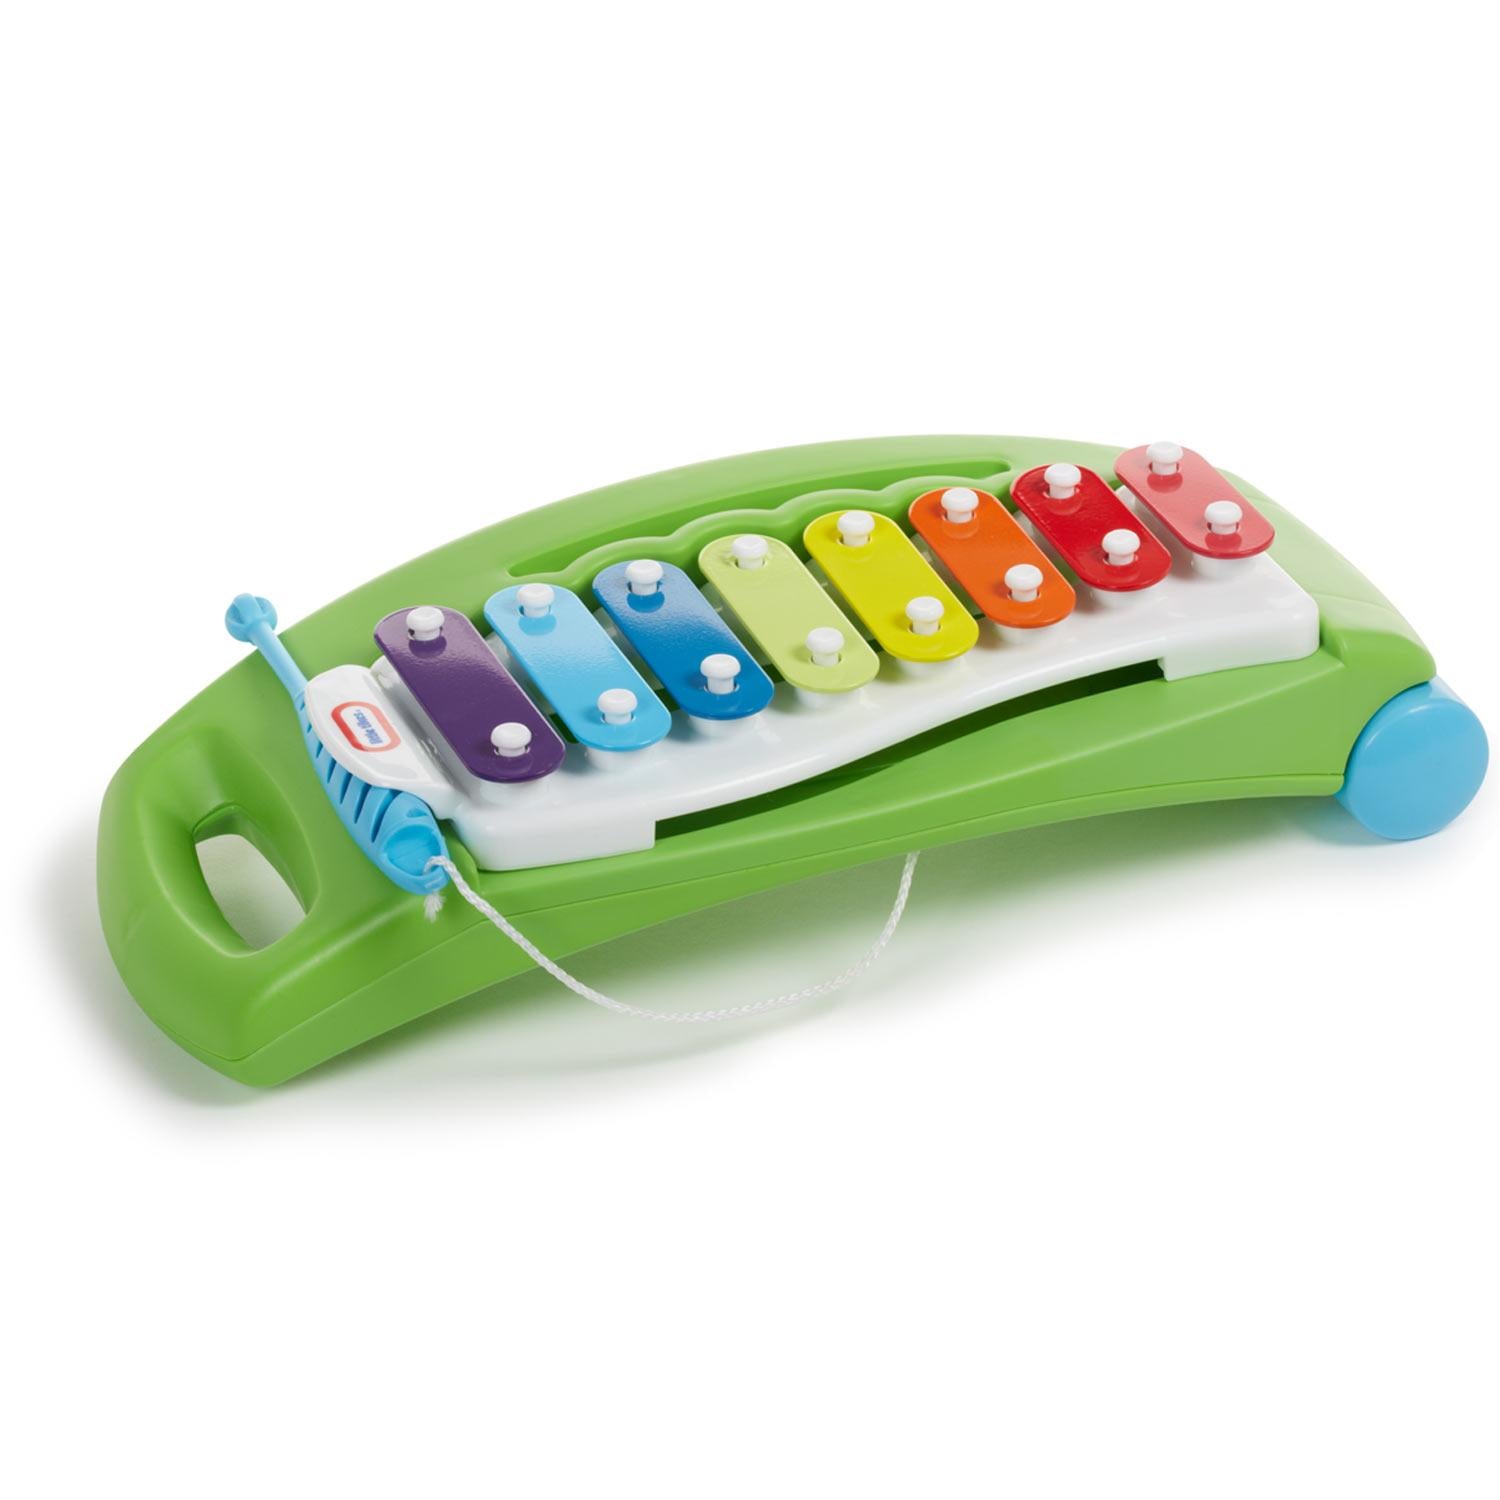 Tap-a-Tune® Xylophone - 642982